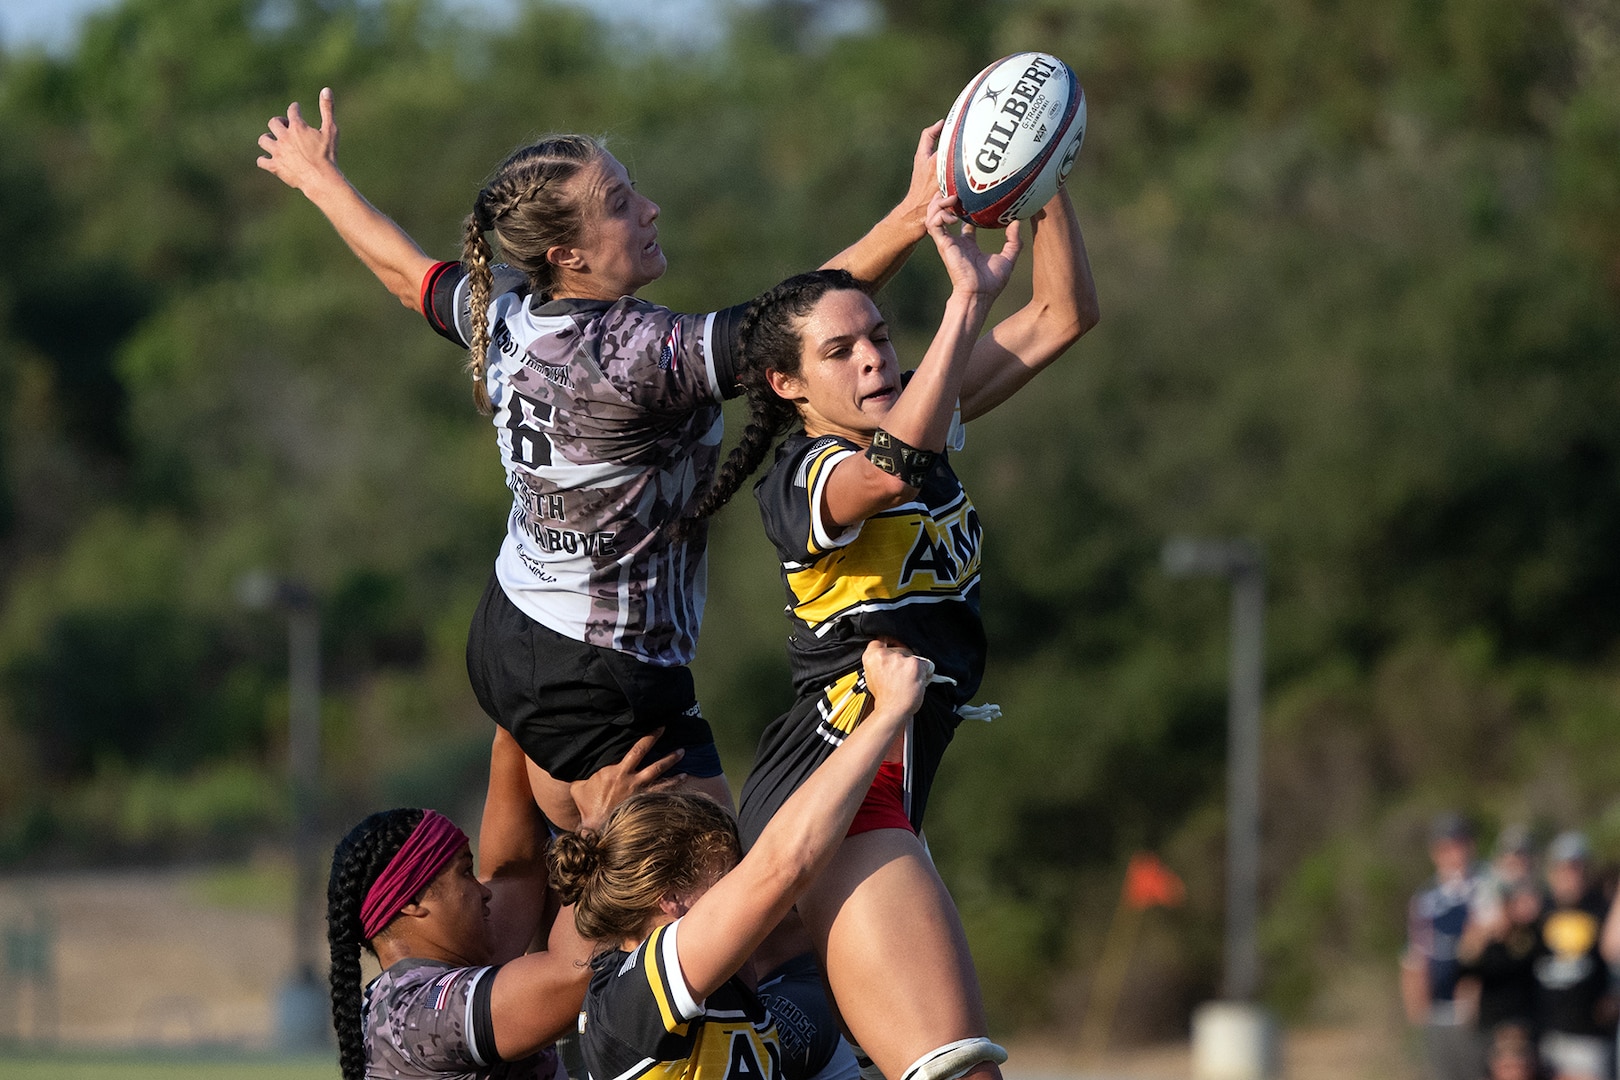 Army 1st Lt. Cienna Jordan, right, and Air Force Capt. Katie Mueller battle for a ball during the 2024-Armed Forces Women’s Rugby Championships held in conjunction with the San Diego Surfers Women’s Rugby Club 7’s Tournament in San Diego, Calif. from July 12. (DoD photo by EJ Hersom)